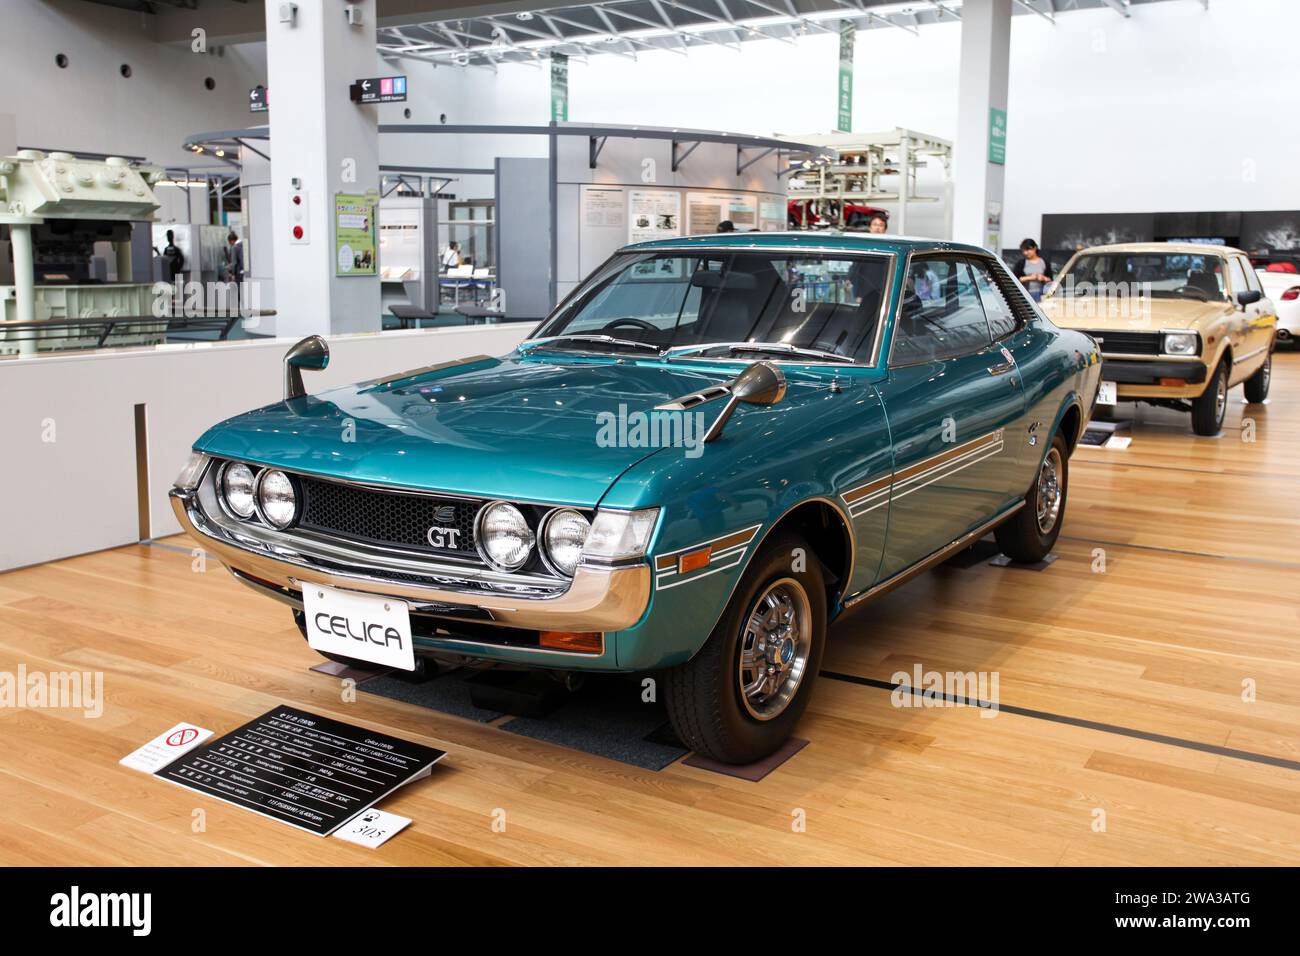 Interior of the Toyota Commemorative Museum of Industry and Technology in Nagoya, Japan. The Toyota Celica GTS is being displayed. Stock Photo